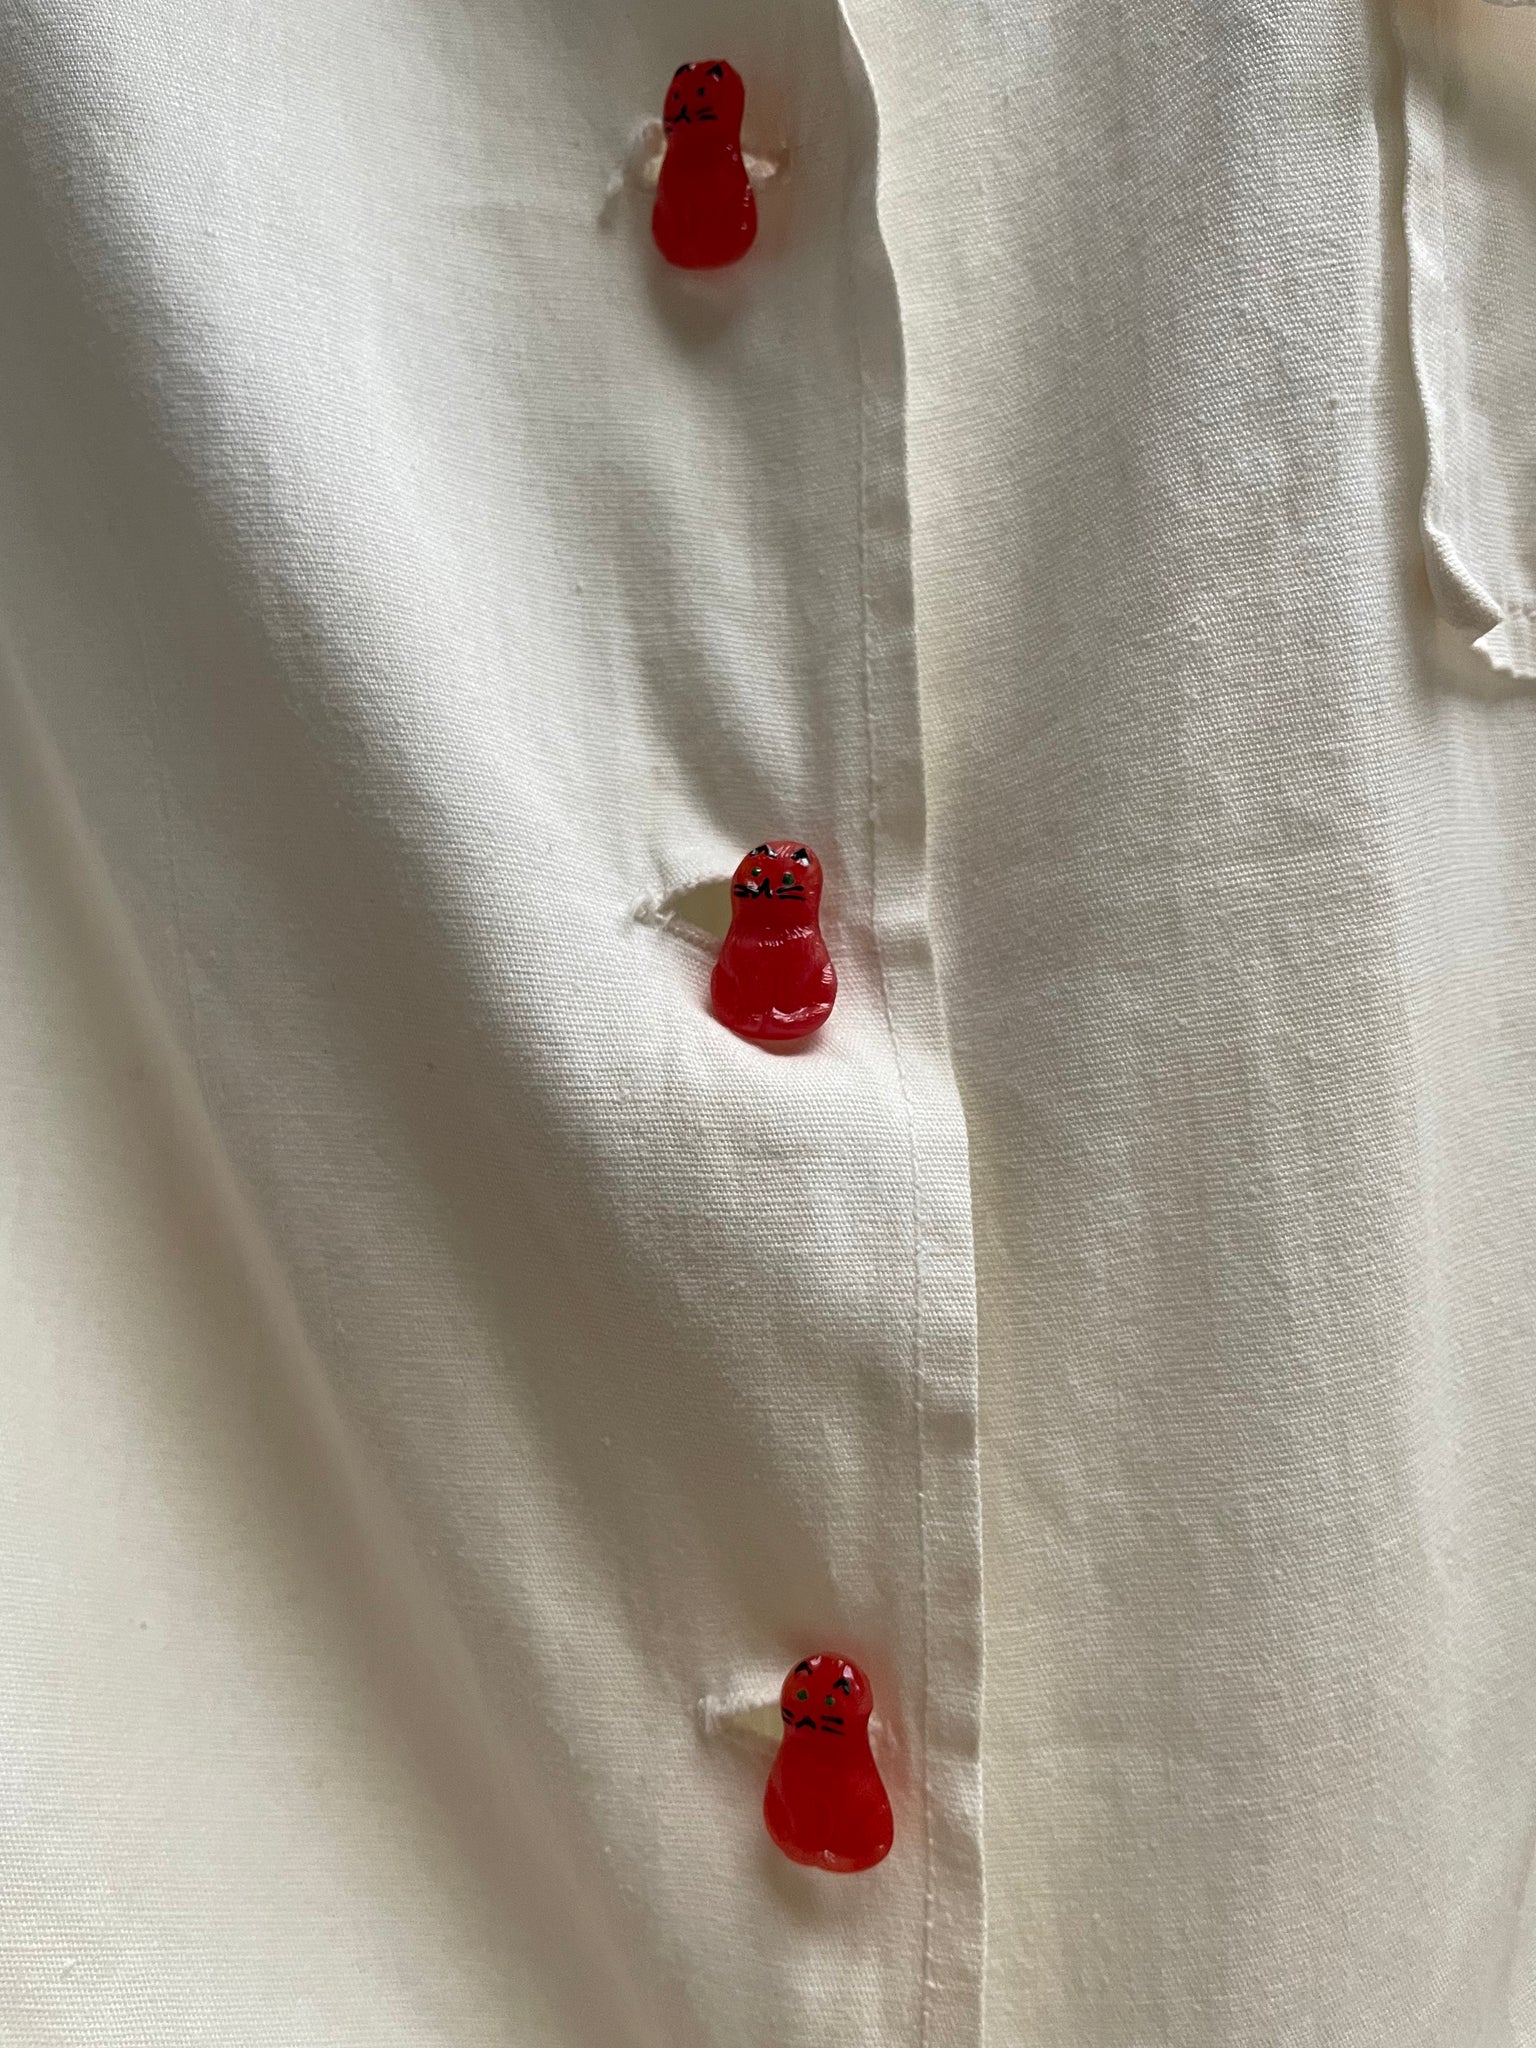 Special "To My Valentine" 1940s Cotton Workwear Blouse * Cat Buttons + Signature*